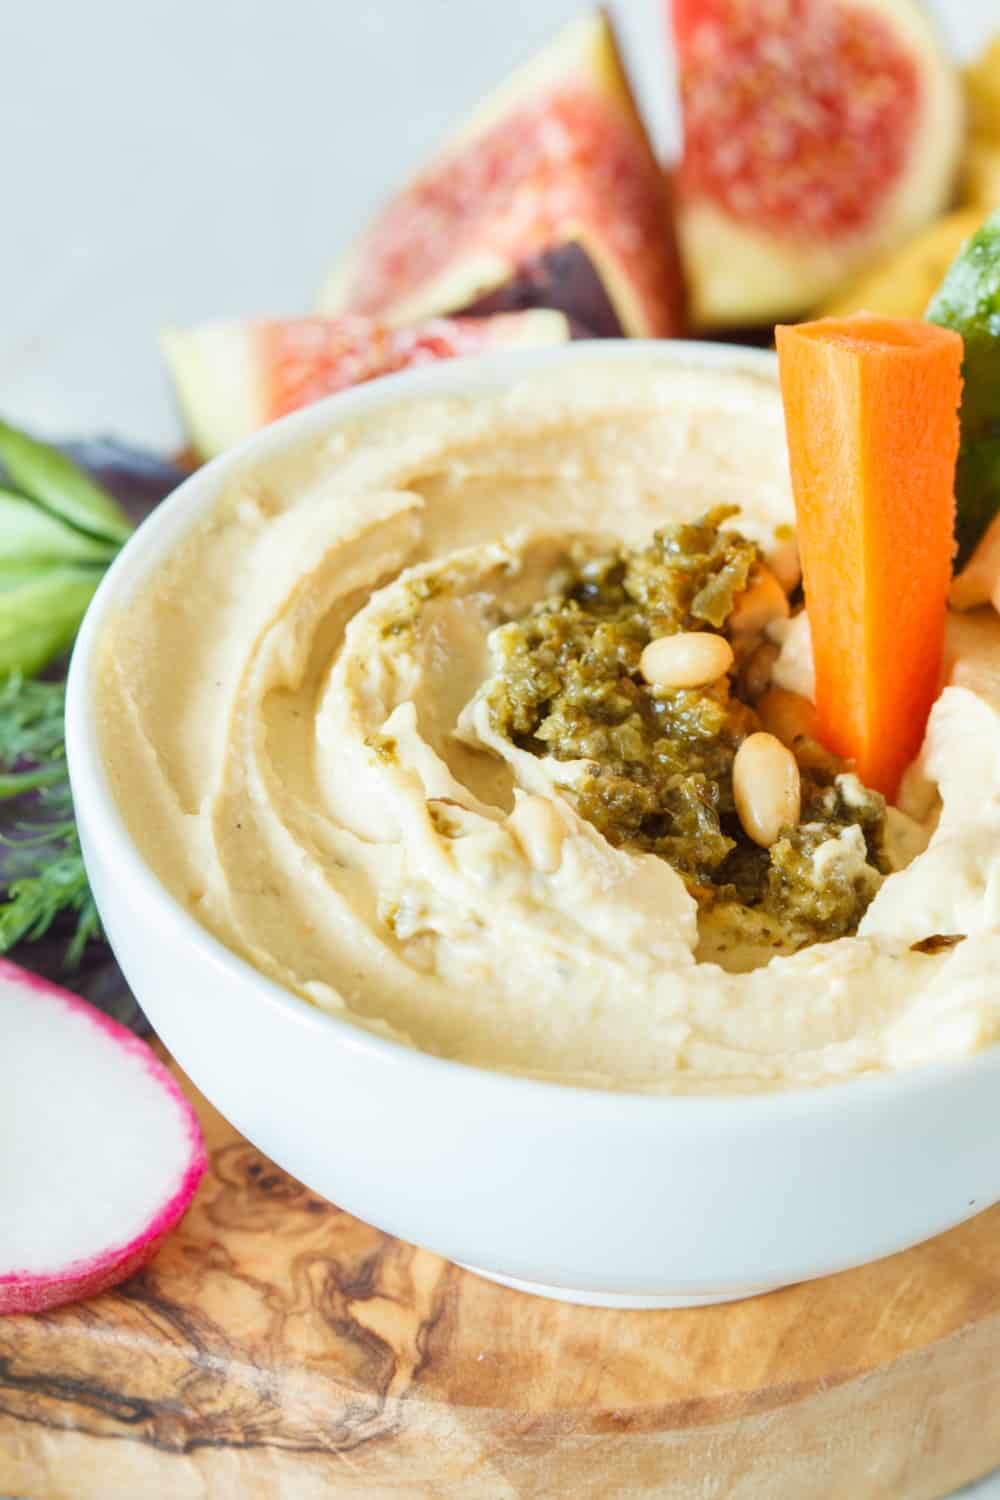 The Risk of Consuming an Expired Hummus